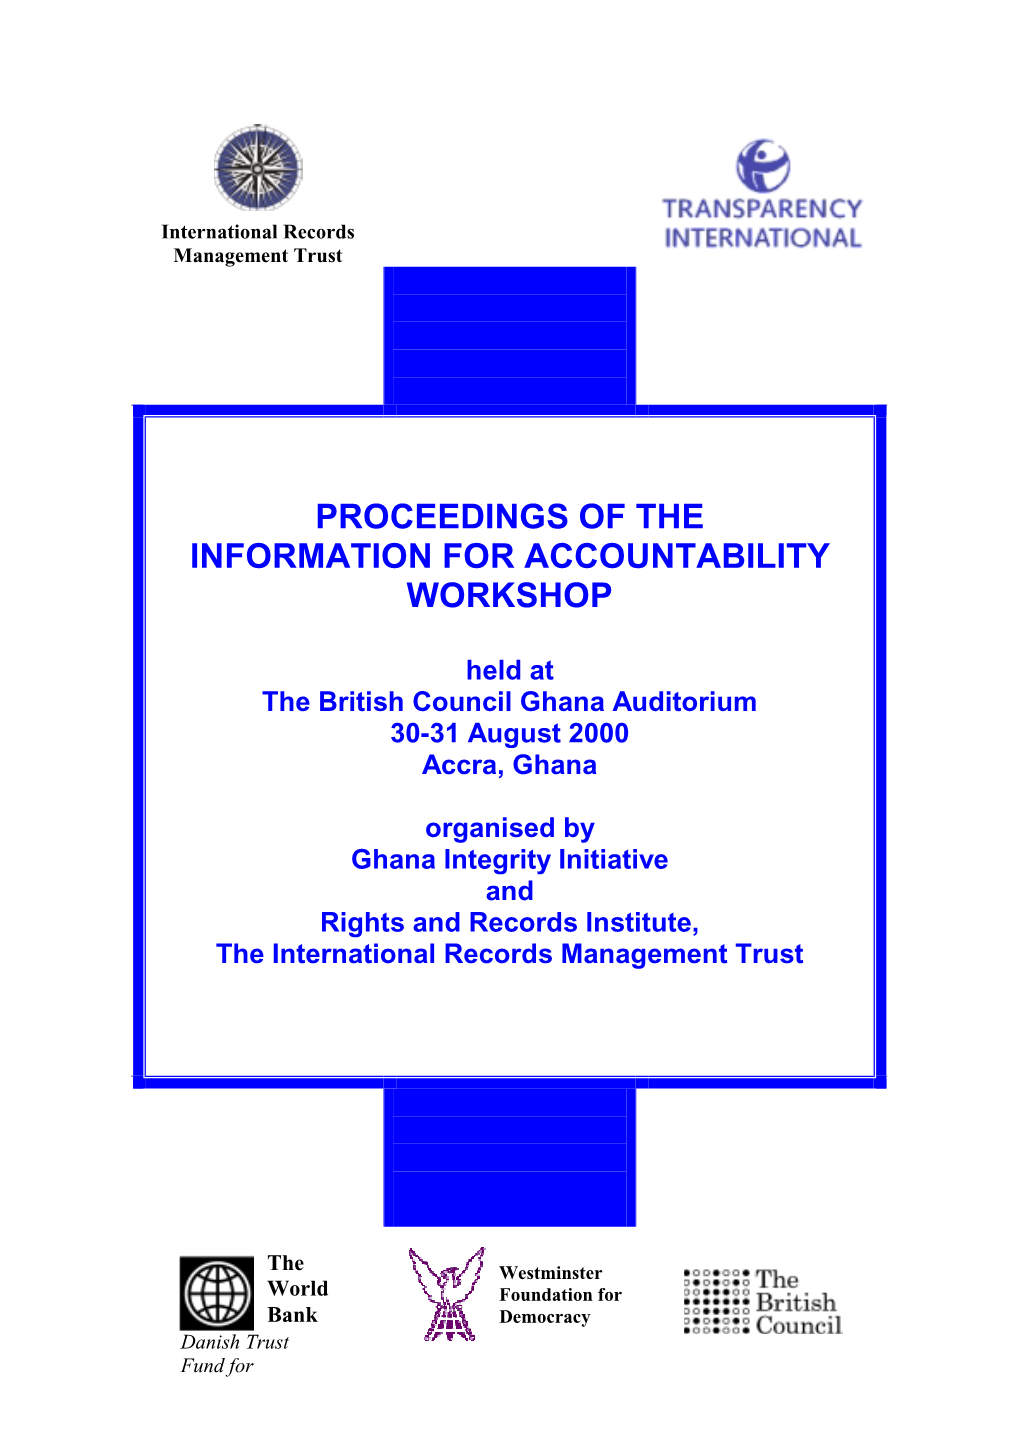 Proceedings of the Information for Accountability Workshop, Ghana